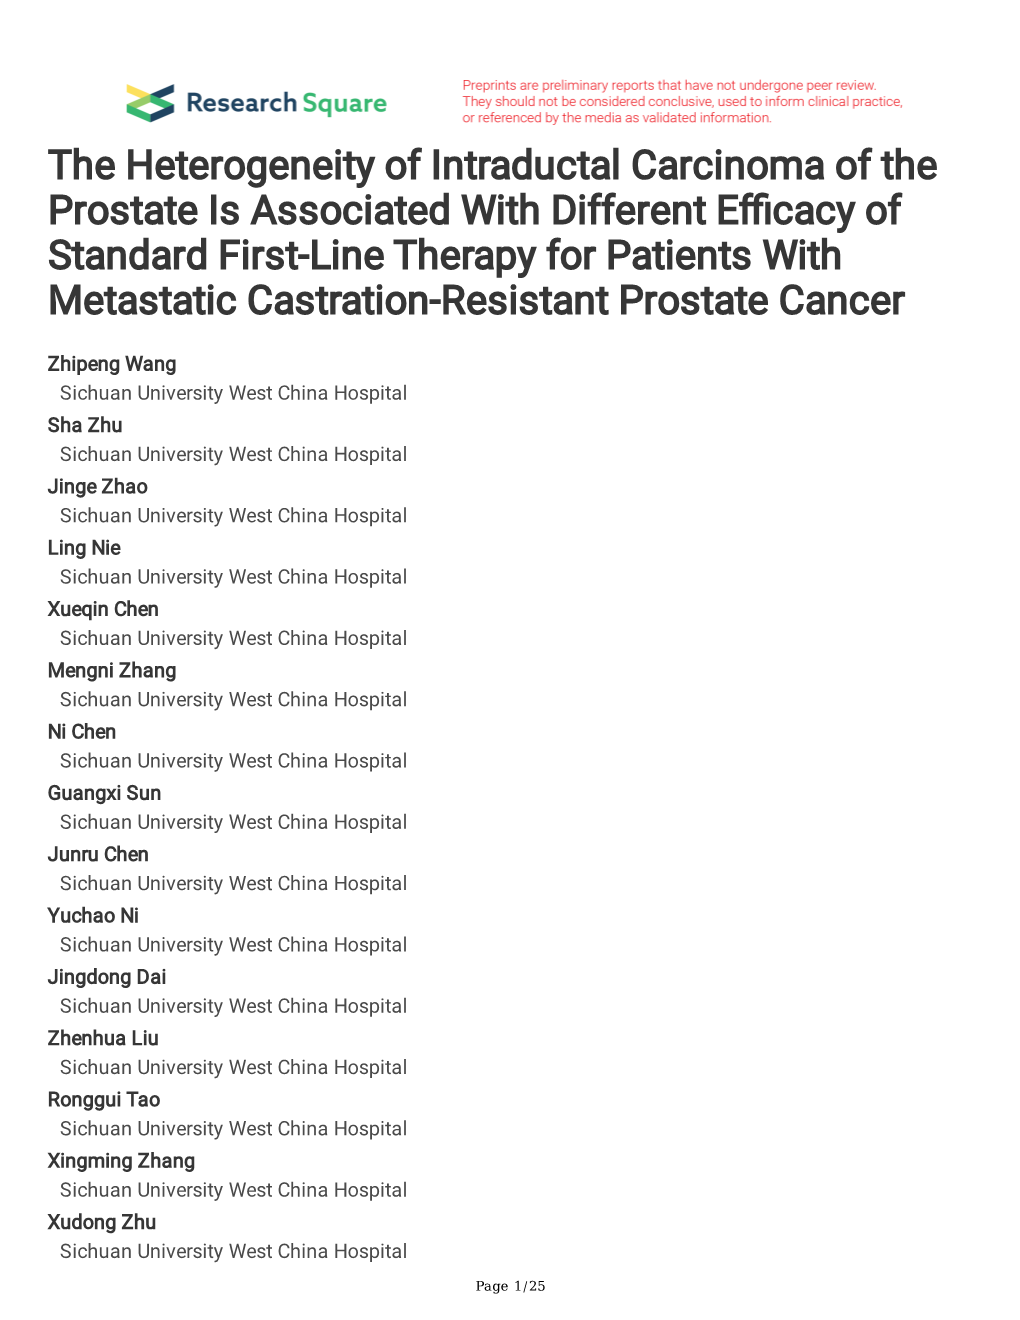 The Heterogeneity of Intraductal Carcinoma of the Prostate Is Associated with Different E Cacy of Standard First-Line Therapy Fo